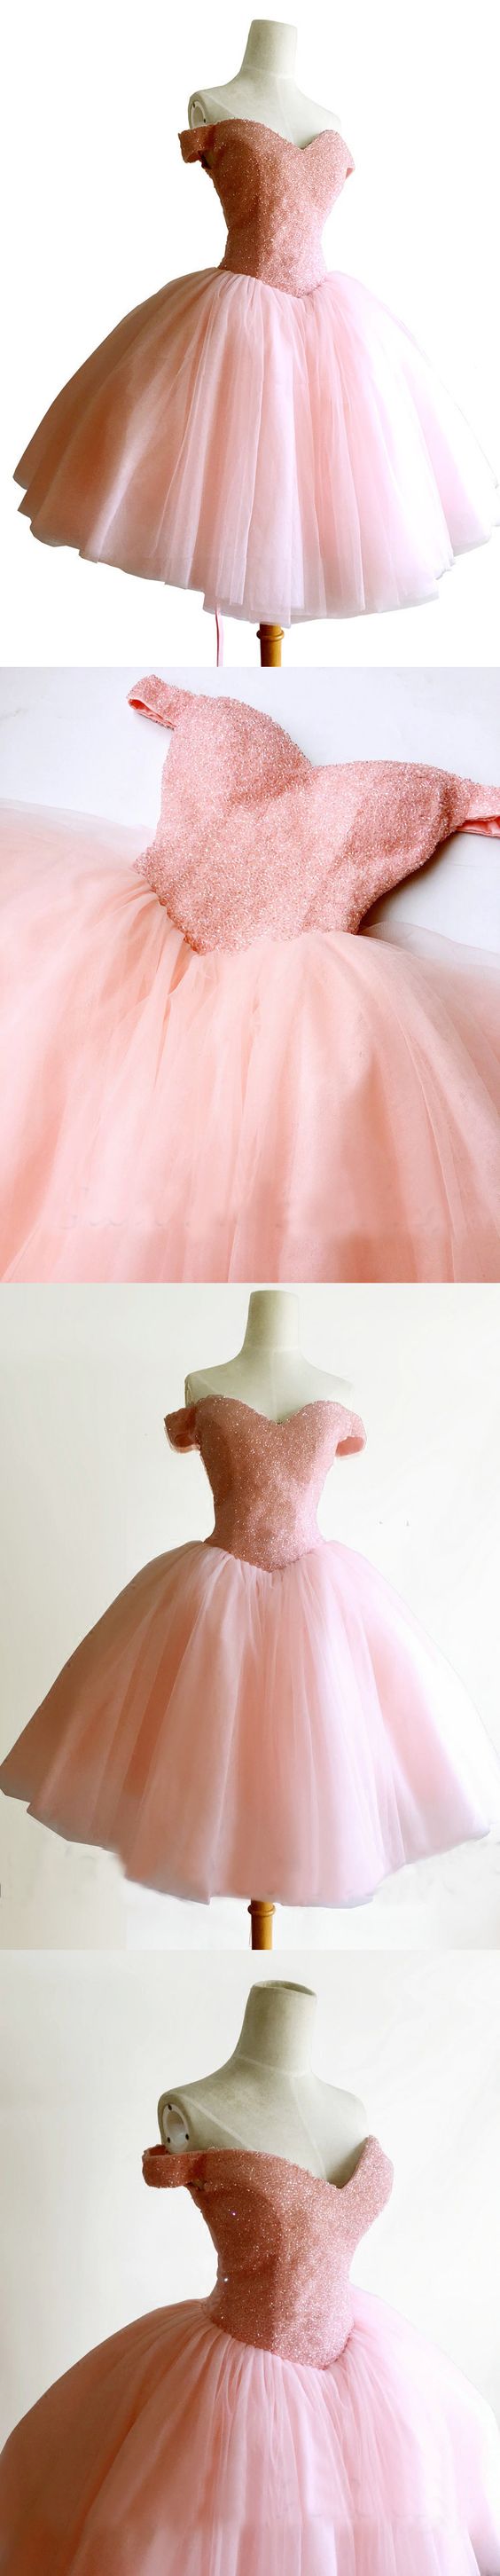 Chic A-line Off-the-shoulder Sparkly Homecoming Dresses Unique Short Prom Dress Pink Homecoming Dresses M5608